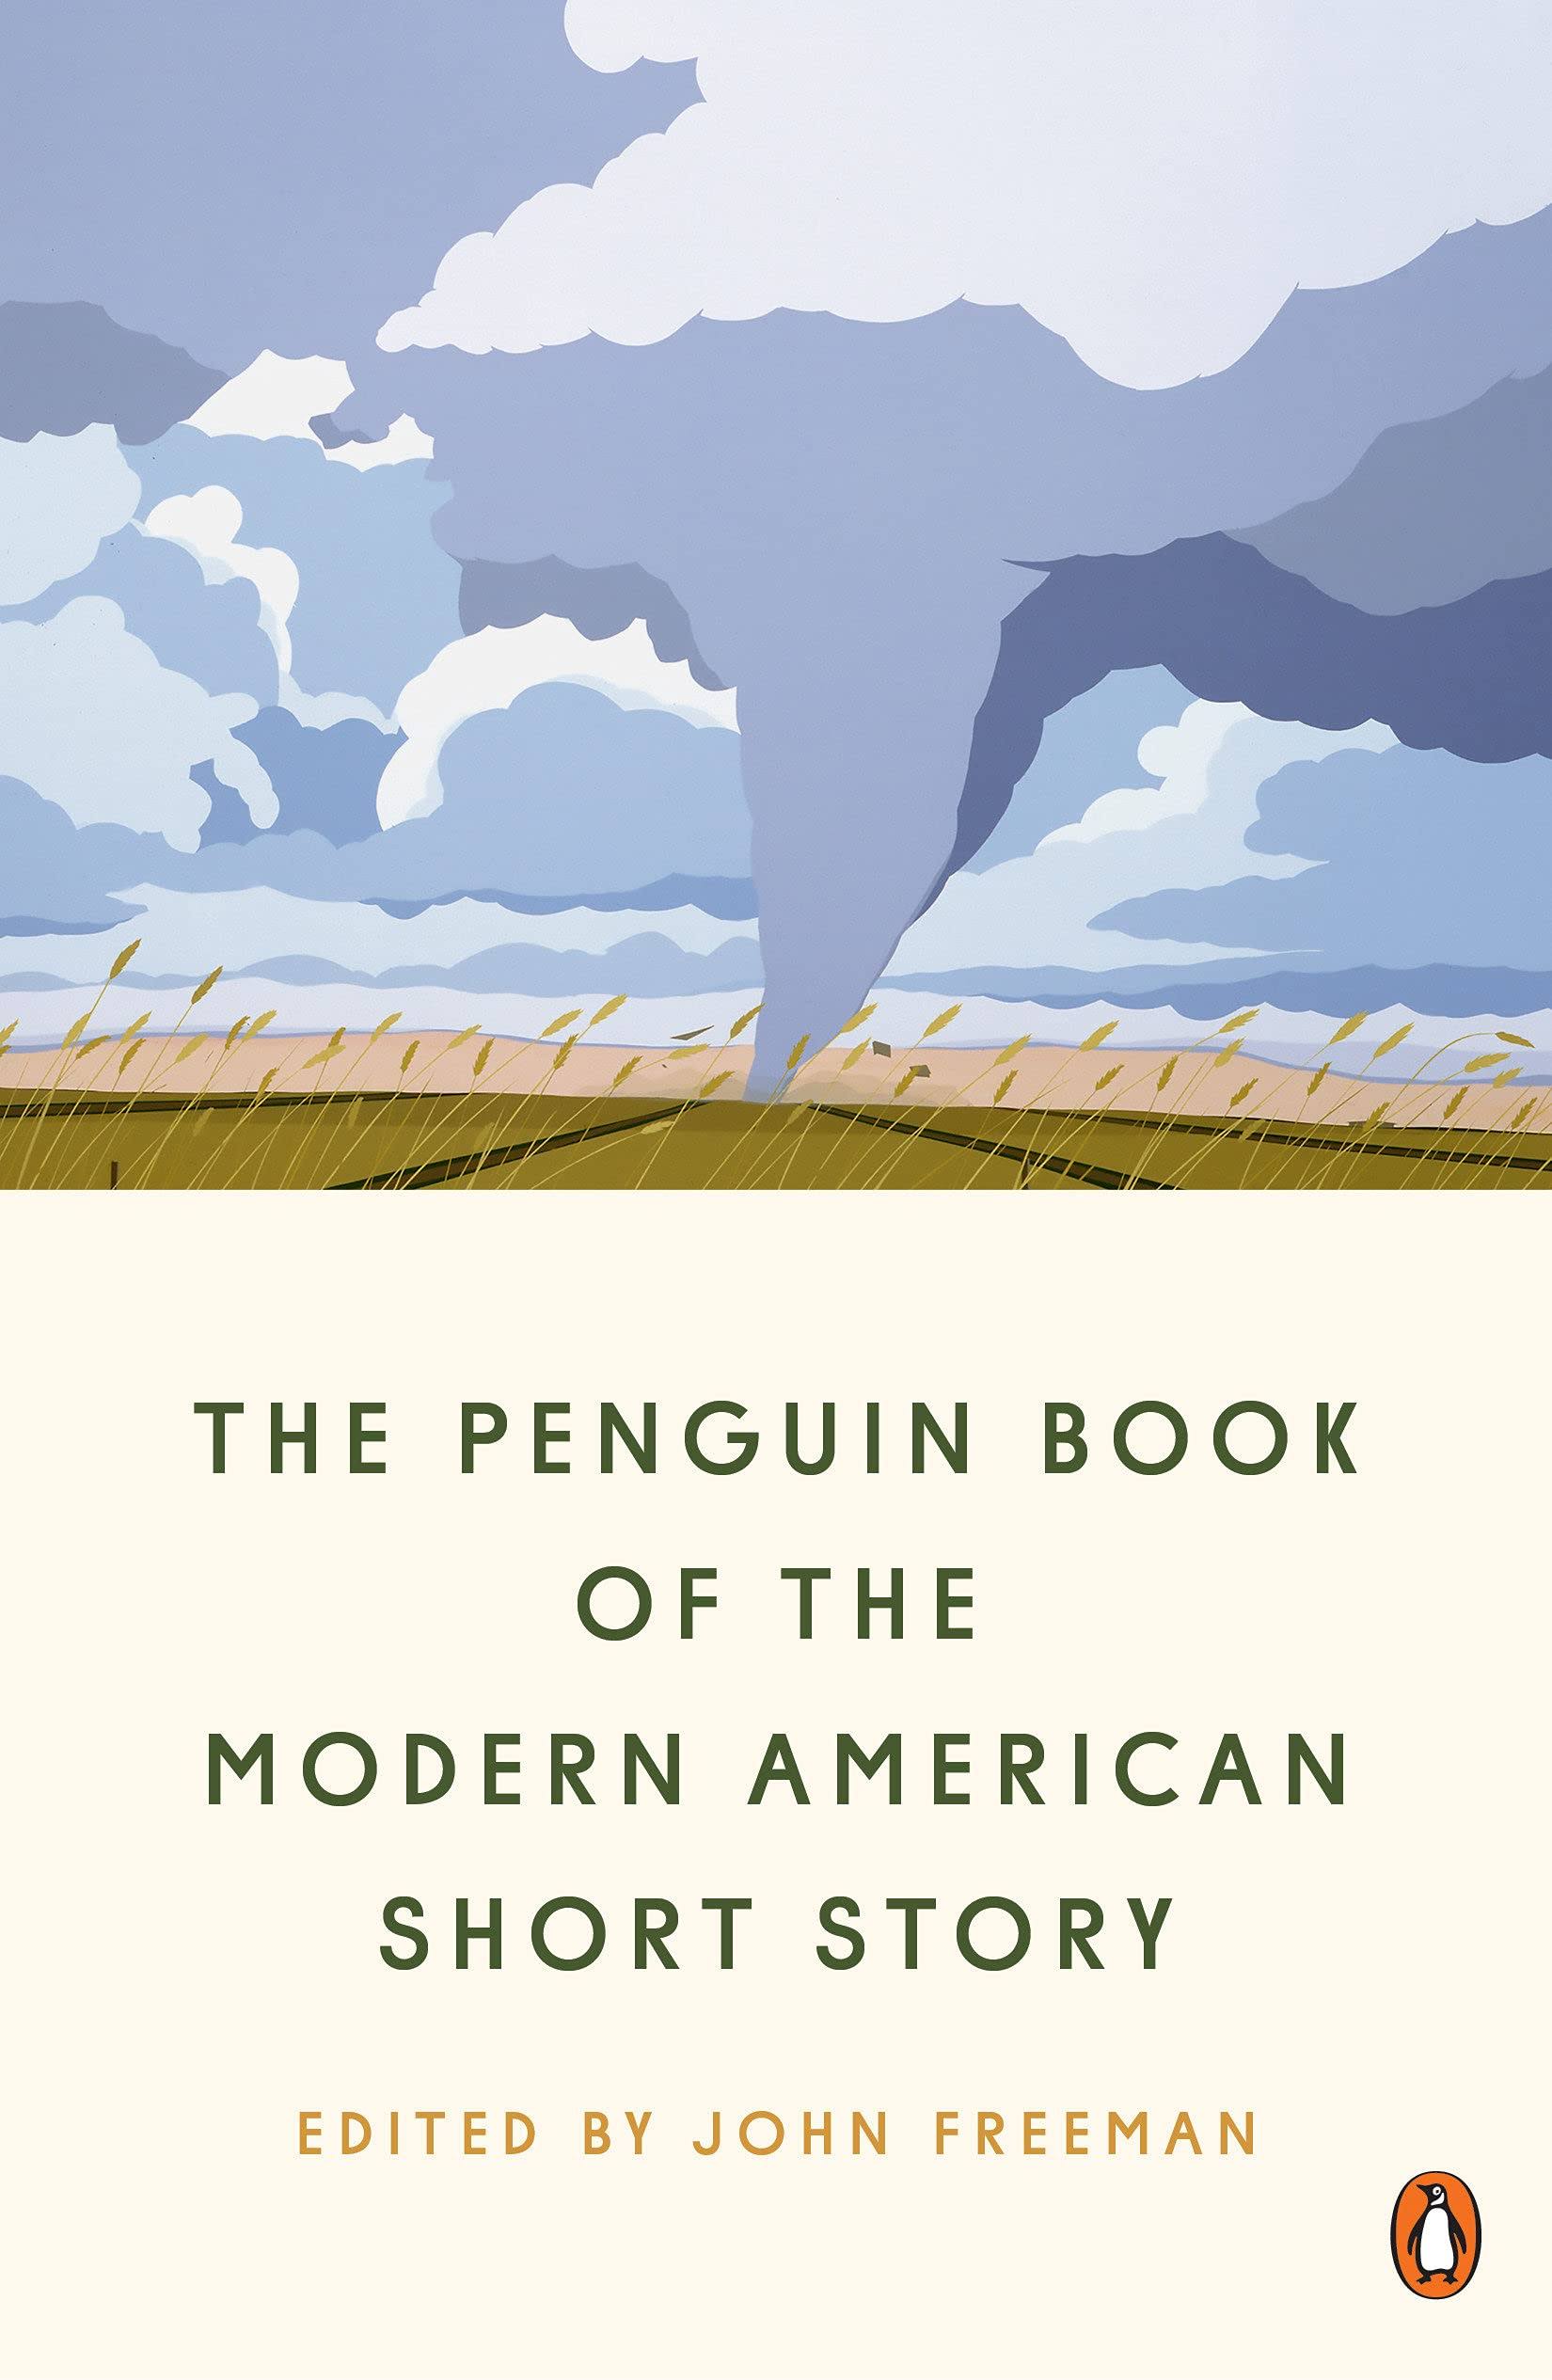 The Penguin Book of the Modern American Short Story [Book]